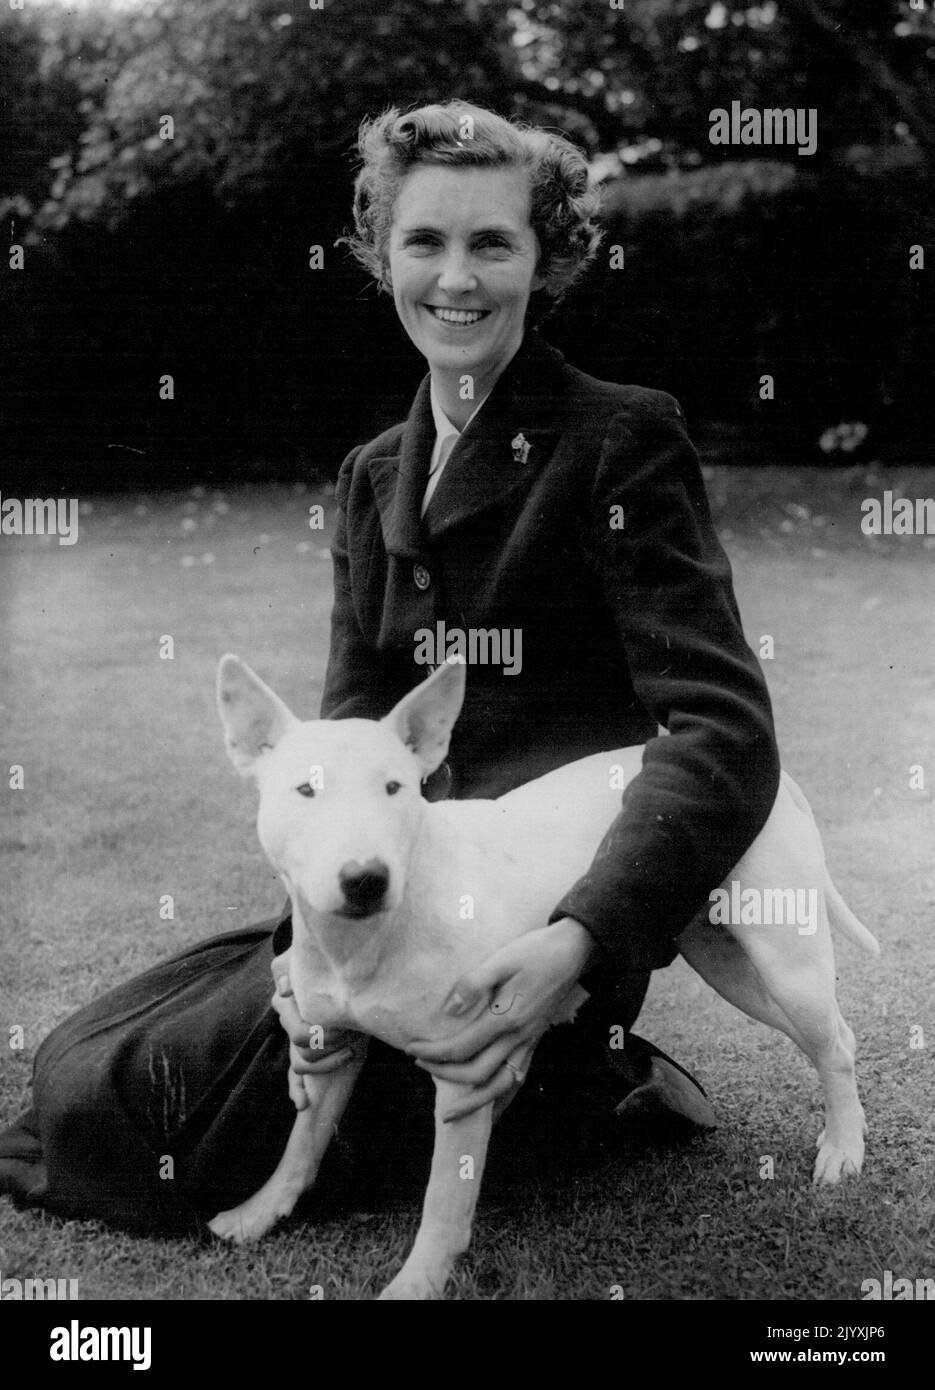 Prunella Stack, who his back in England from a South Africa for the coming of age celebrations of the Women's League of Health and beauty photographed to-day with Weezle, a Bull Terrier, at Rusper, near Horsham, home of Lady Jean Zinovieff. Prunella the 'Perfect Woman' of the late 1930's - took over the League in 1935. November 9, 1951. (Photo by Daily Mail Contract Picture). Stock Photo